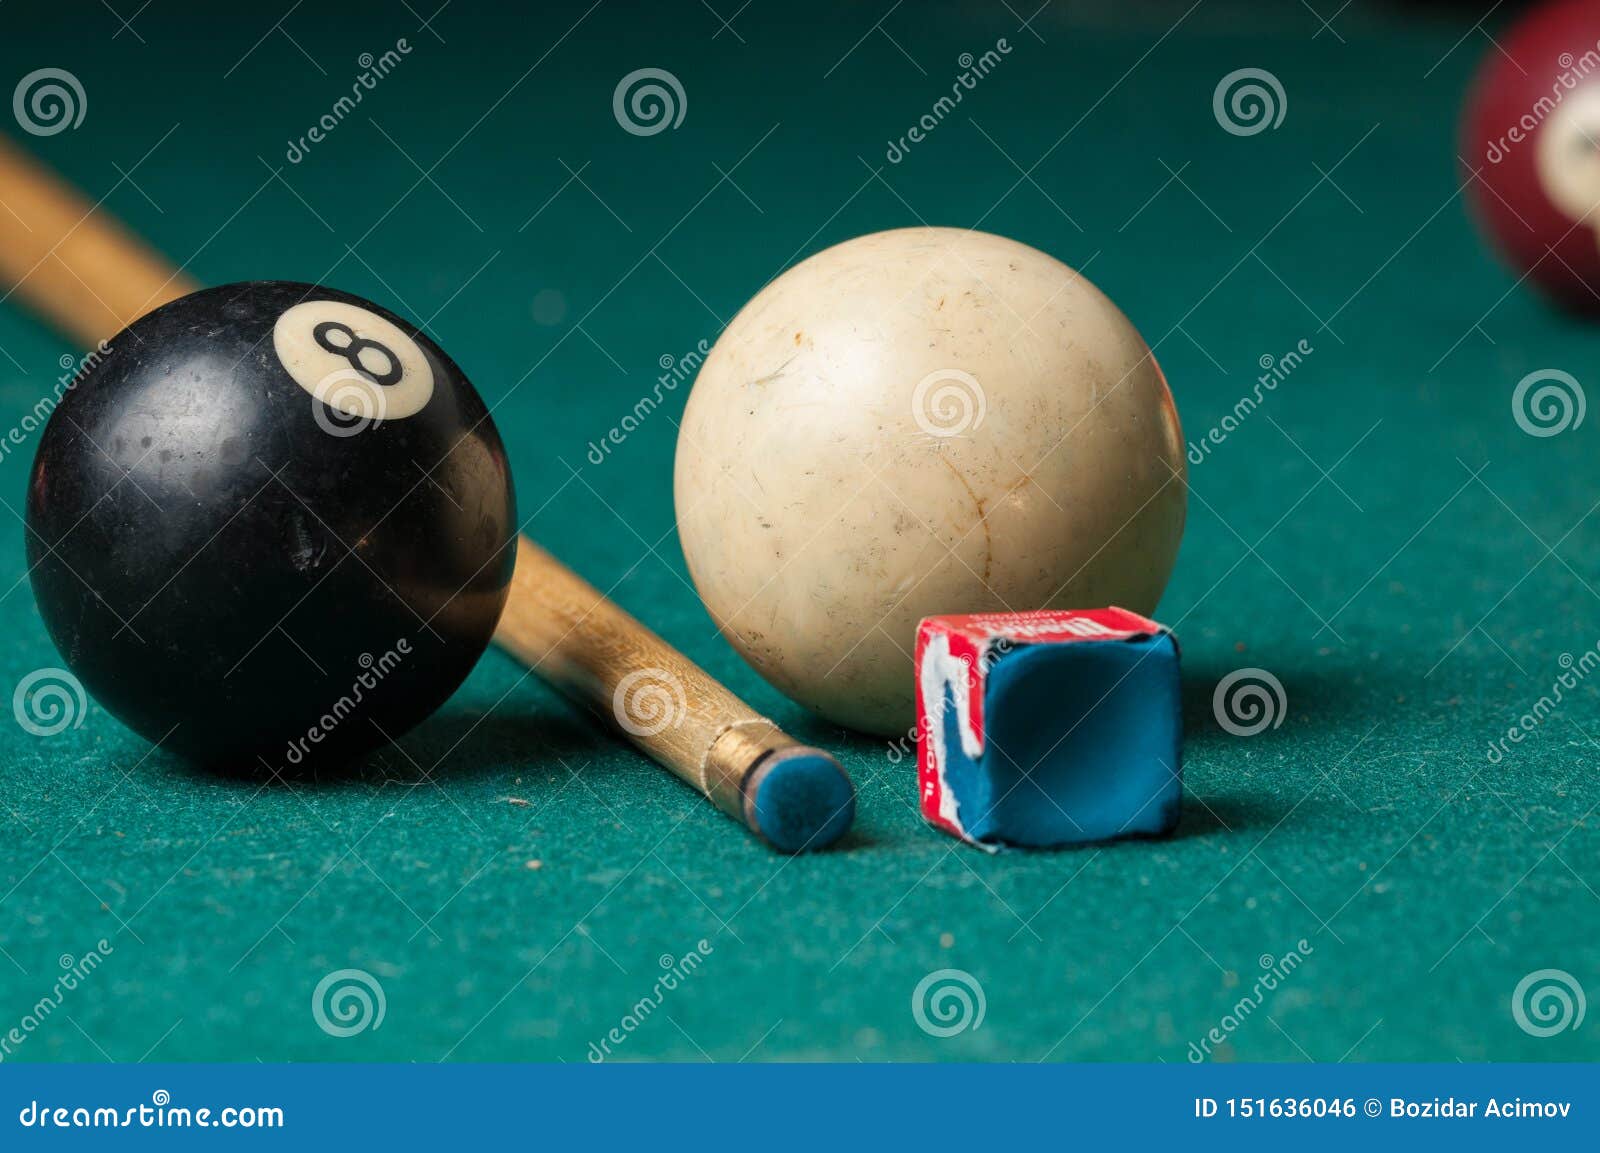 old billiard ball 8 and stick on a green table. billiard balls  on a green background.black and white